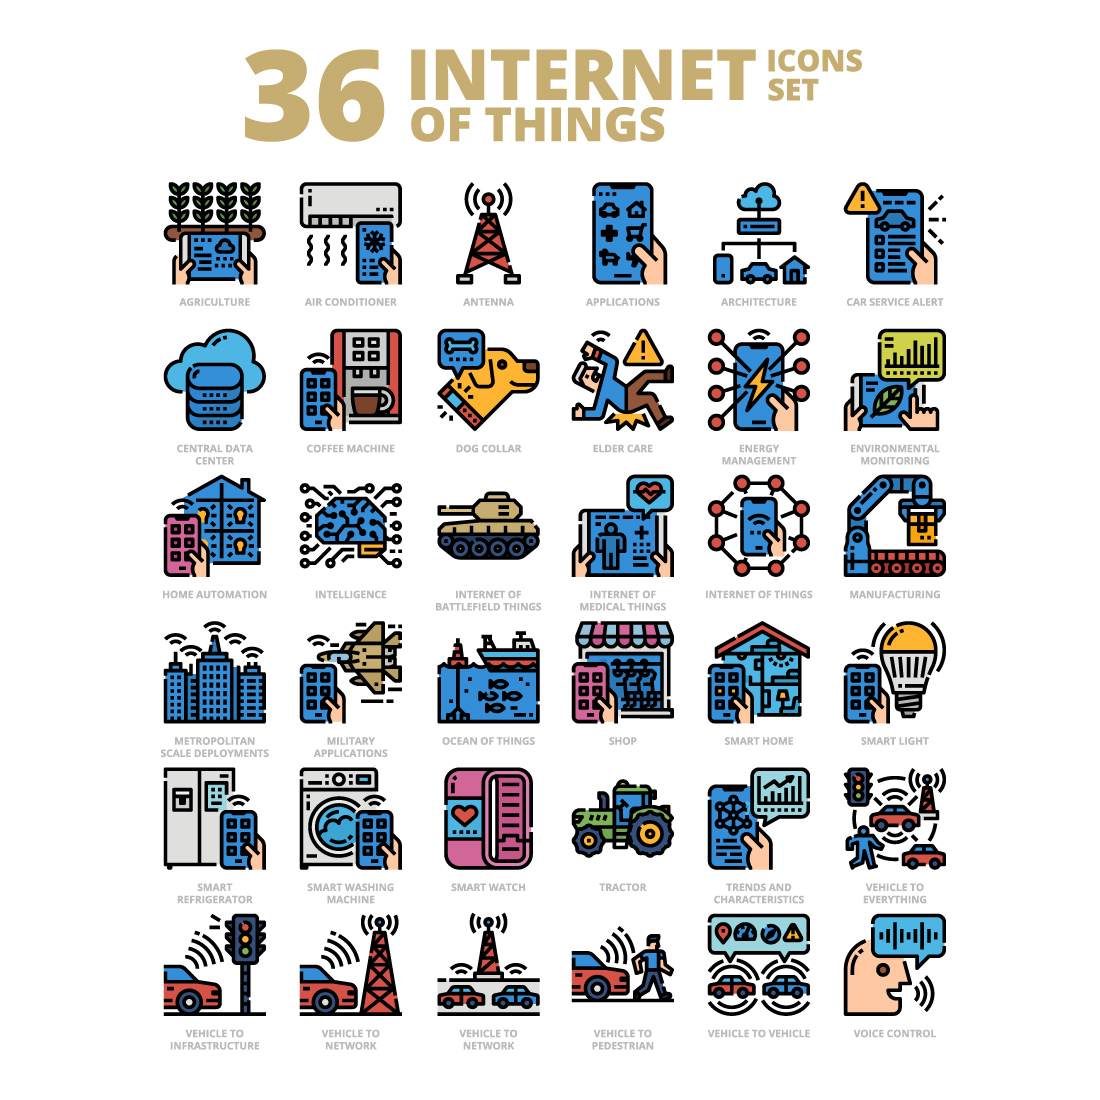 36 Internet of Things Icons Set x 4 Styles cover image.